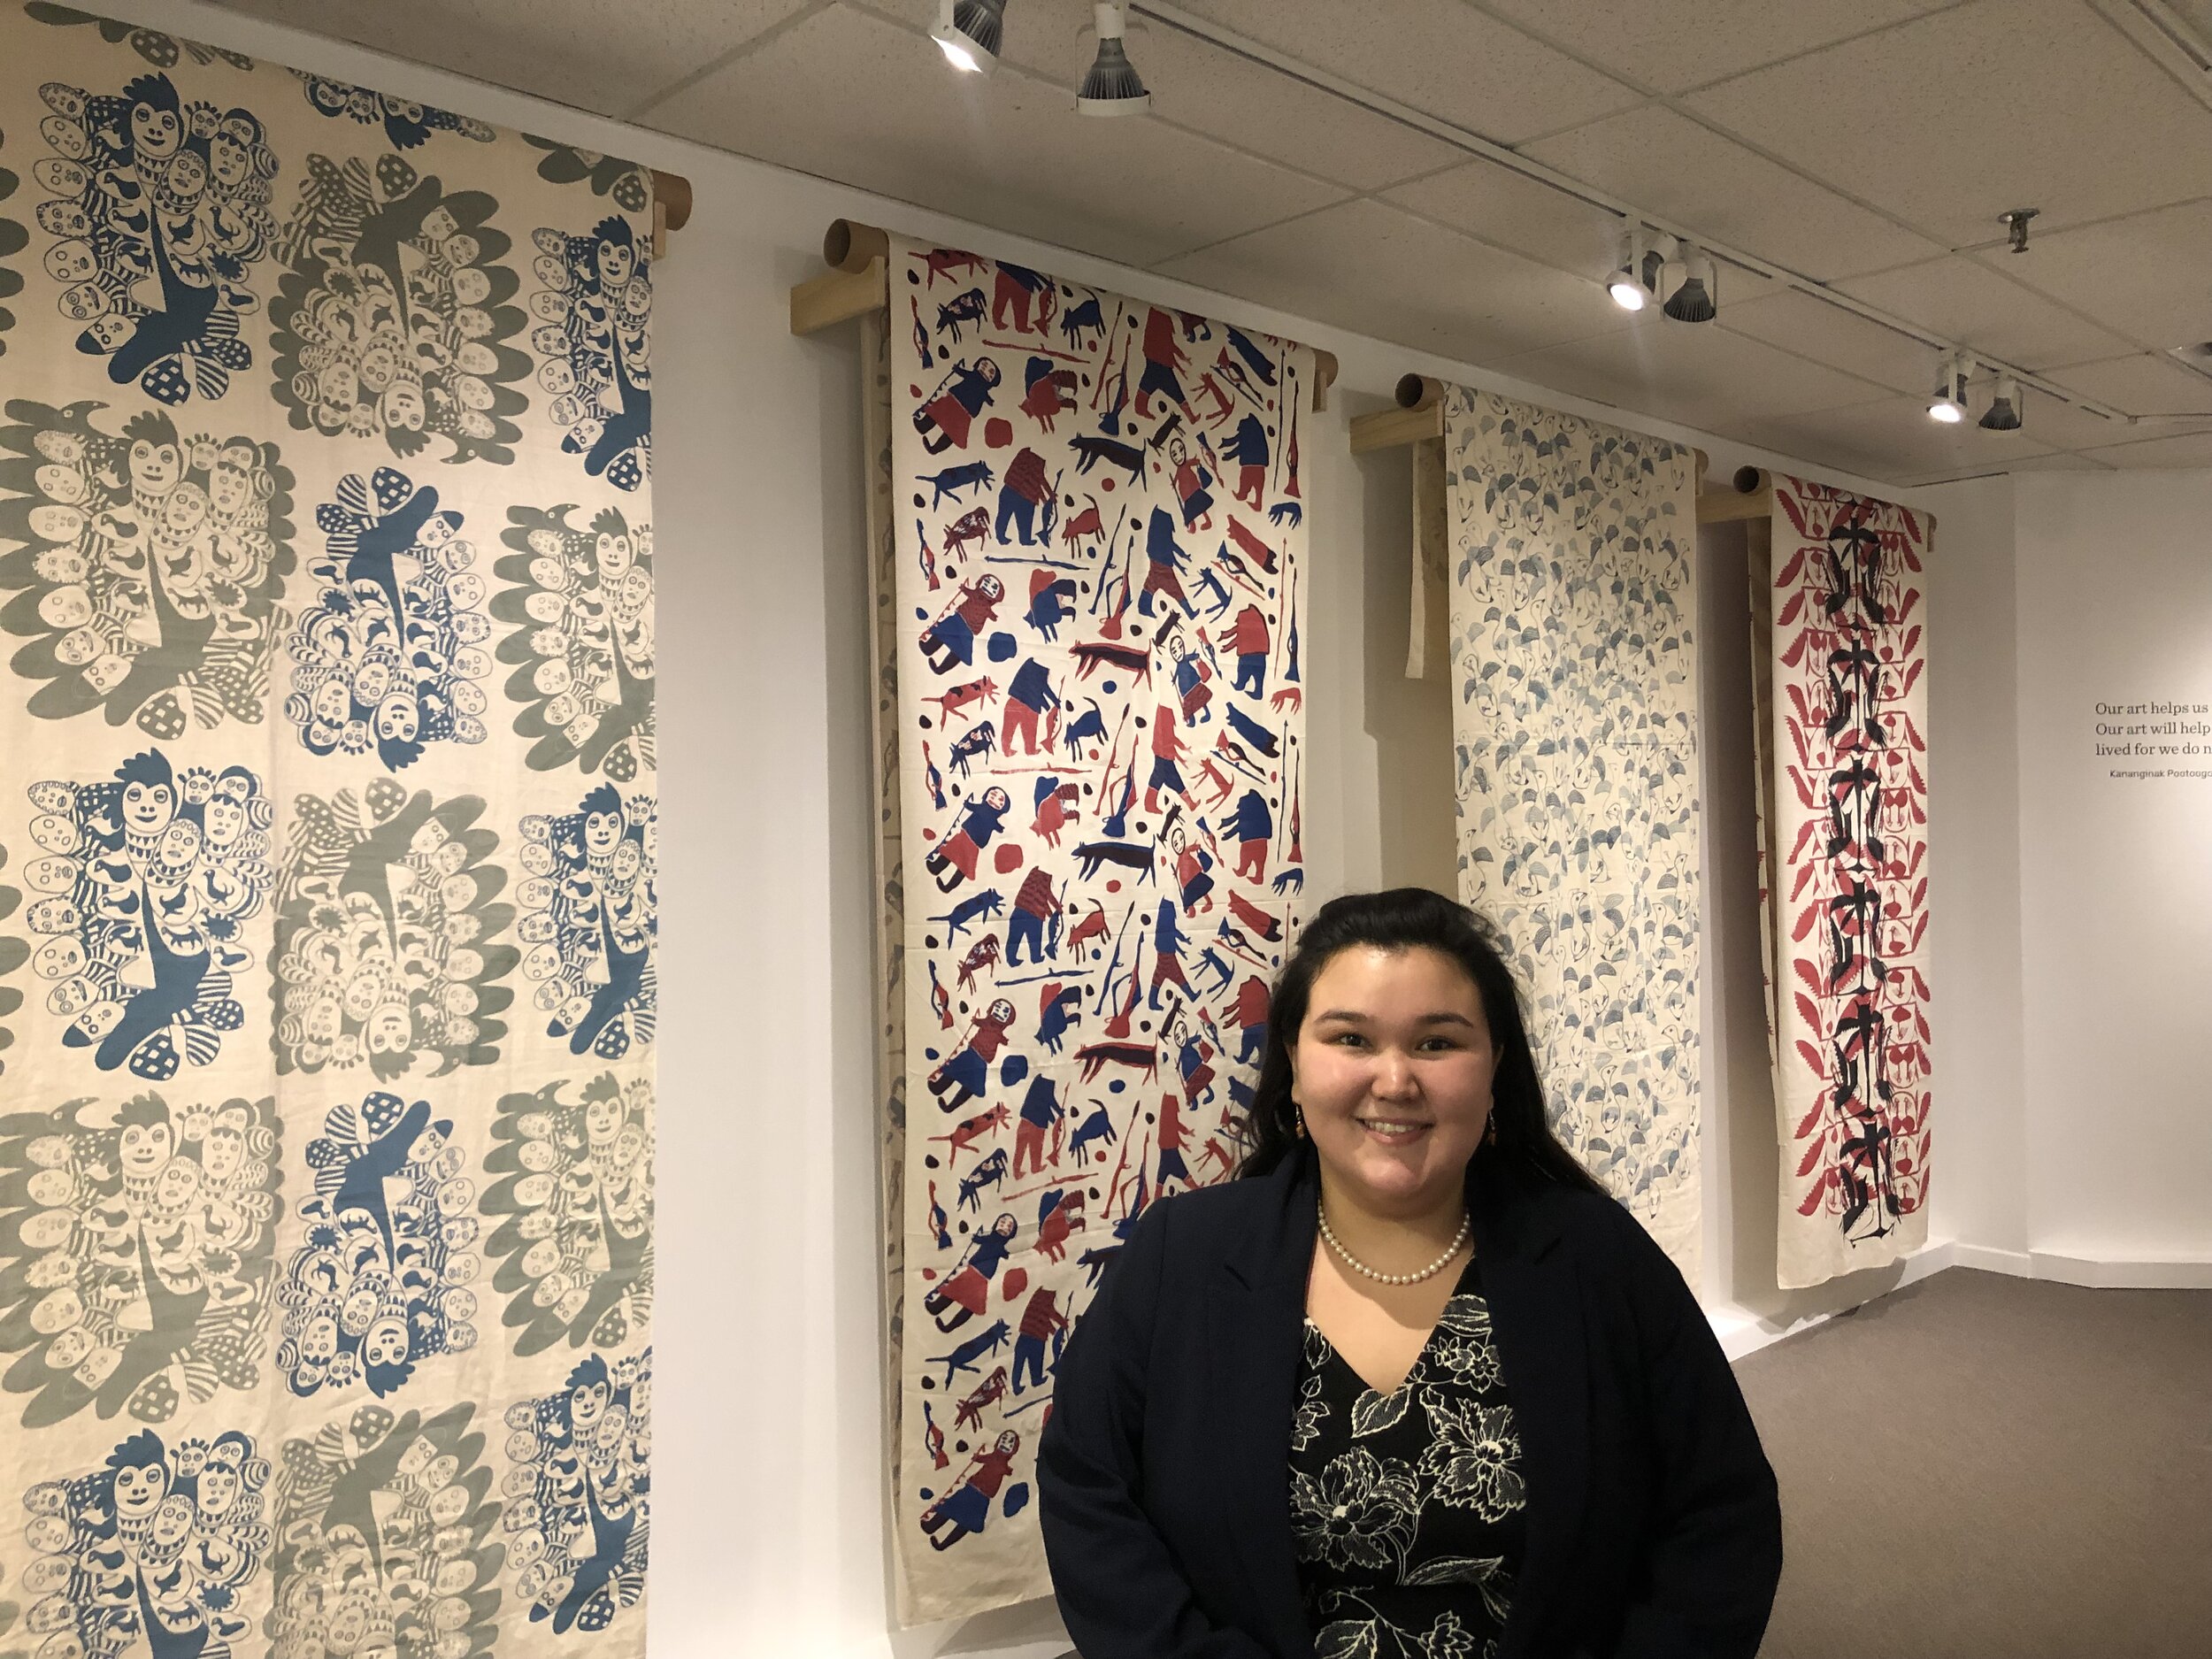  Nakasuk at the Textile Museum of Canada where she gave a tour of the collection focusing on artists from her community and Kinngait Studios. Toronto ON, December 2019. Photo courtesy of Nakasuk Alariaq. 